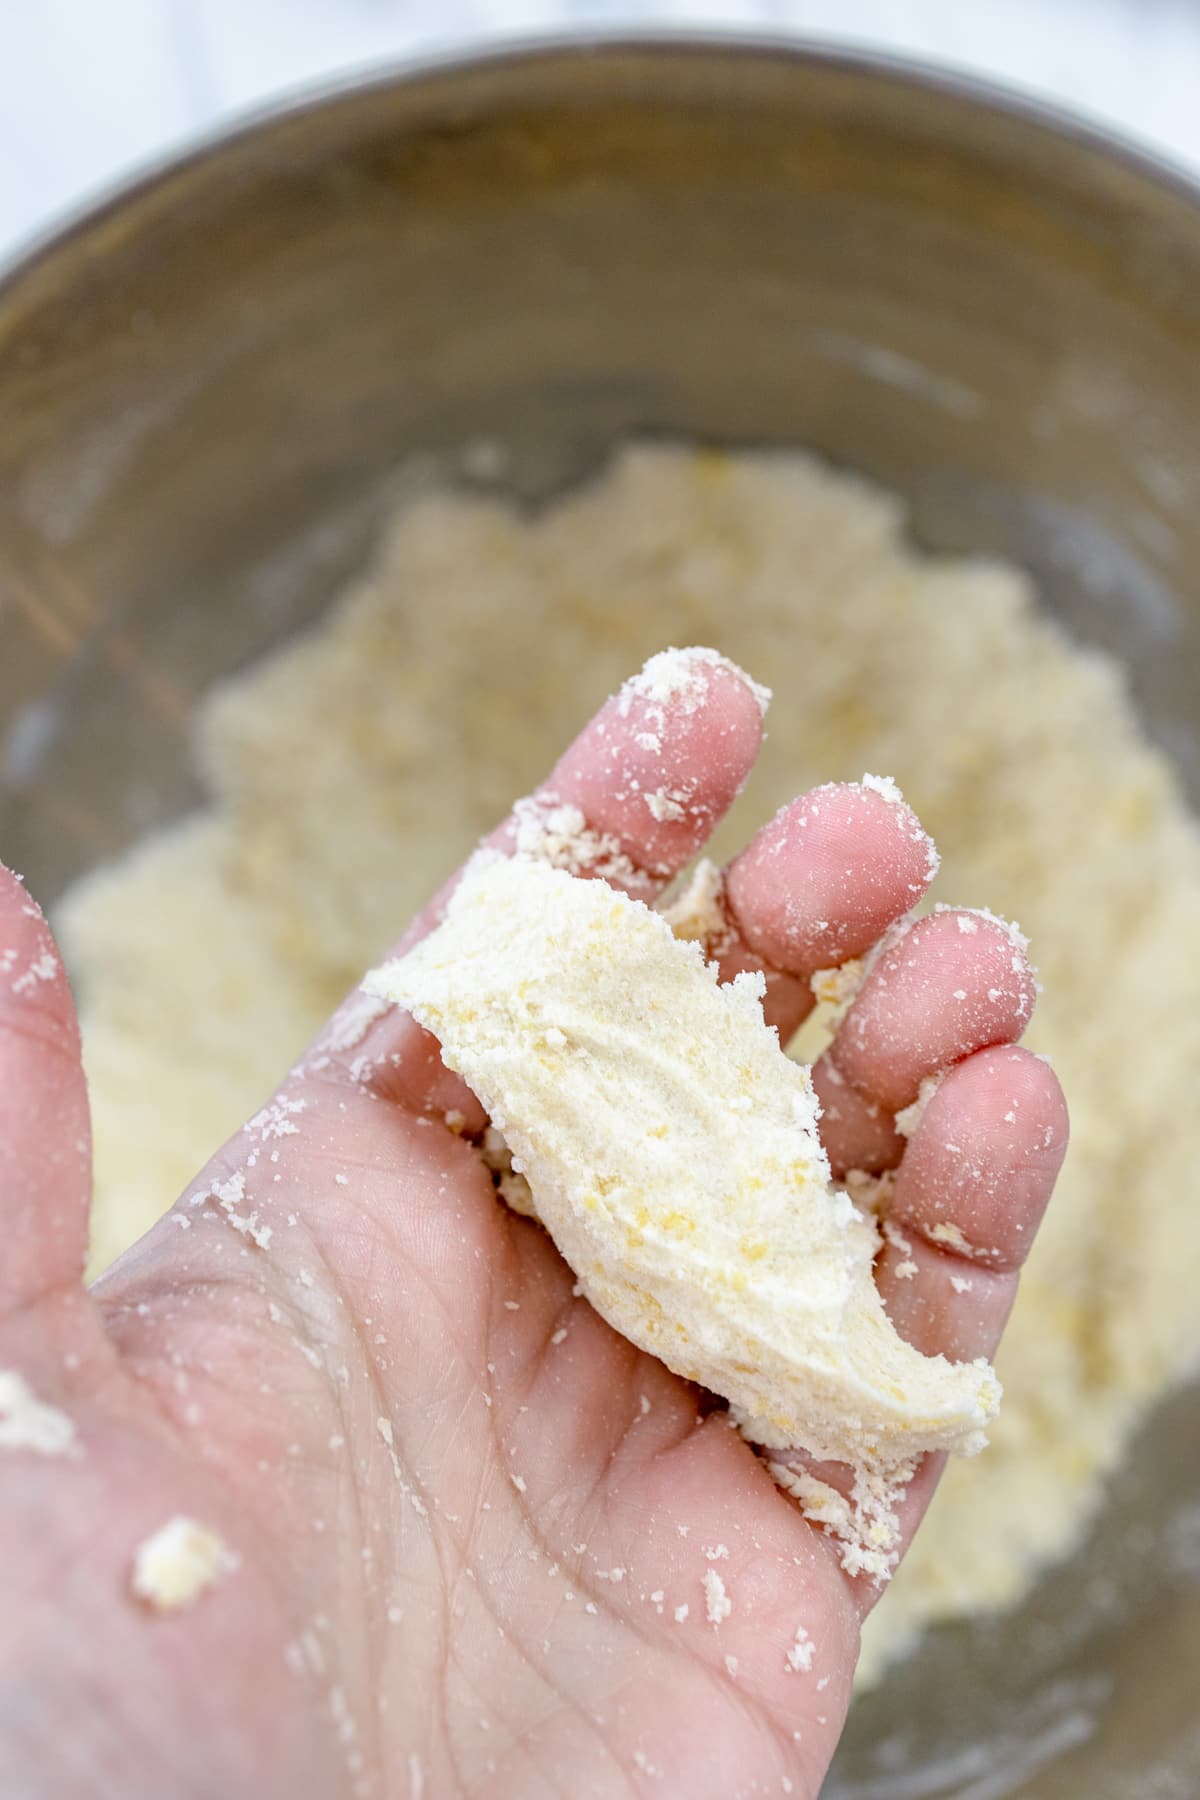 Close up of a hand holding some crumble mixture pressed together.